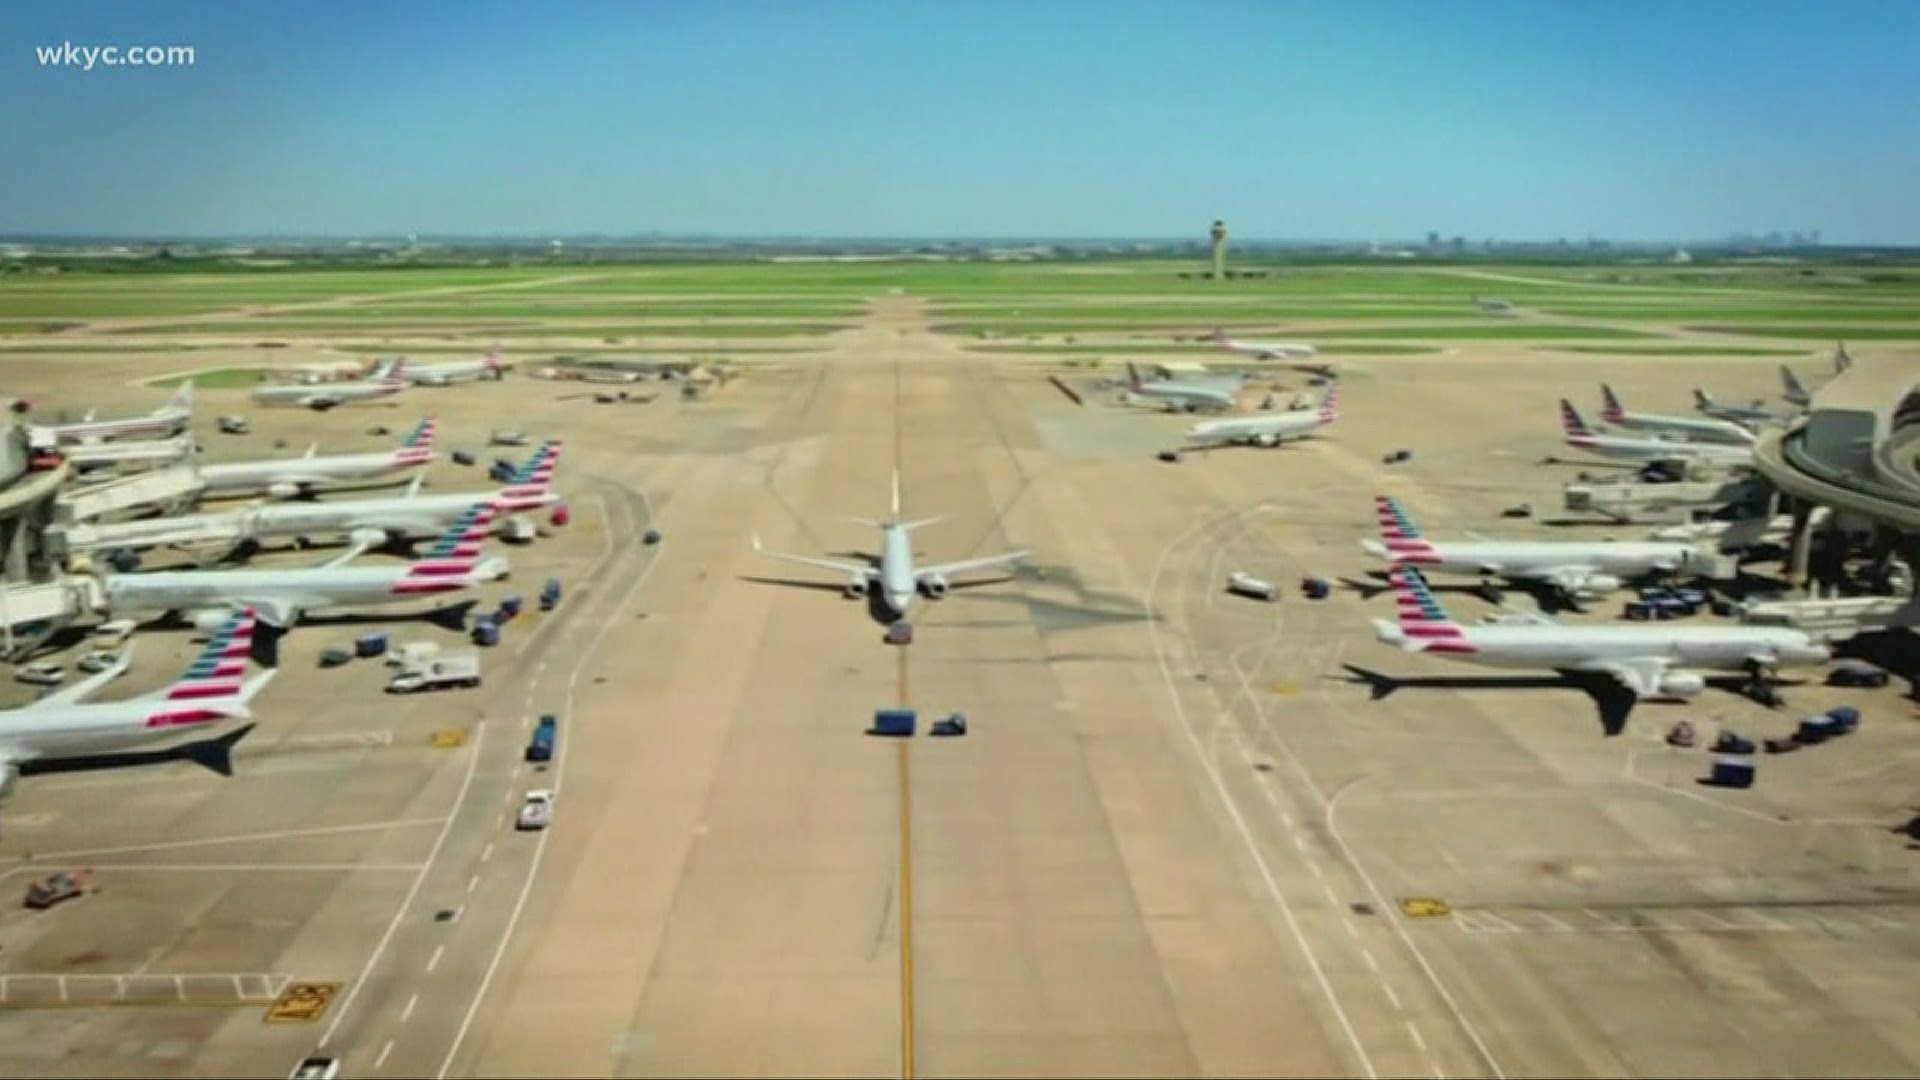 Airlines are hoping people will book future travel with new safety net procedures. 3News' Romney Smith reports.